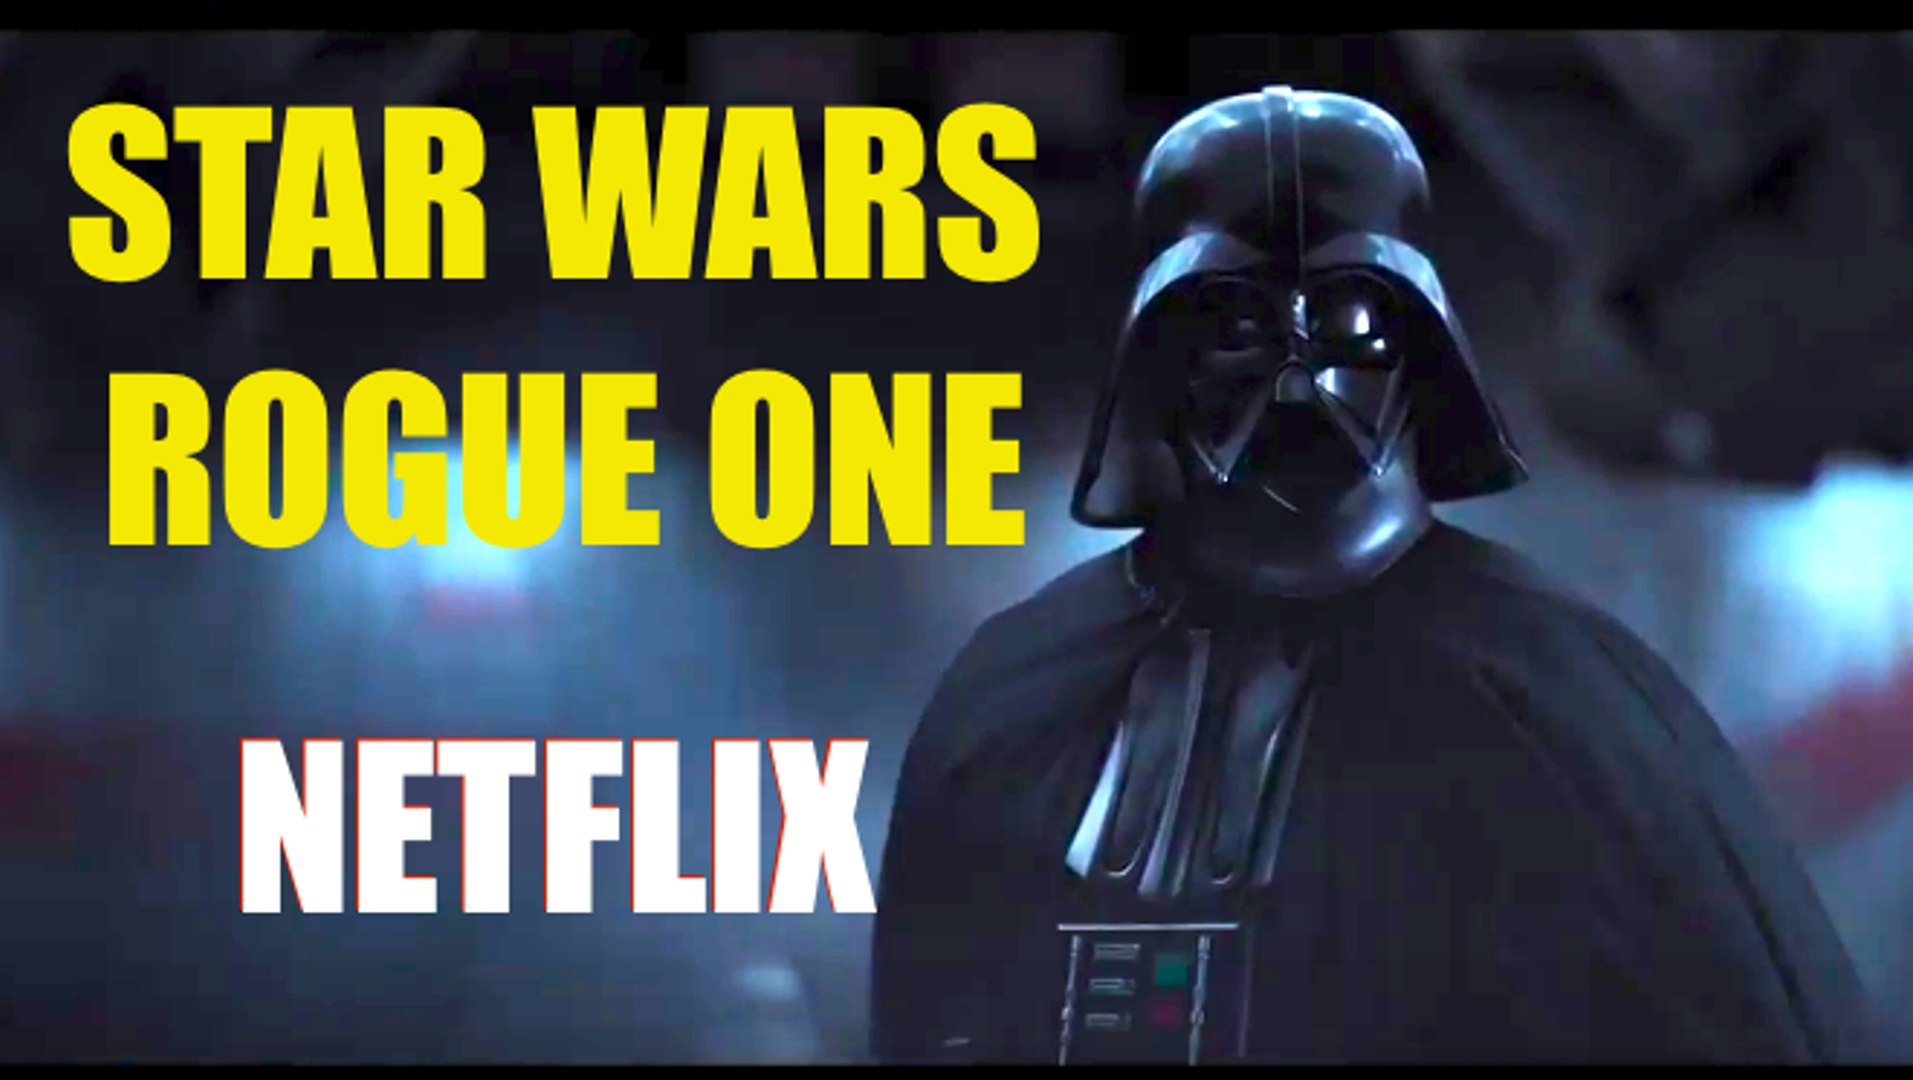 ROGUE ONE: A Star Wars Story - Darth Vader Takes on Rebel Alliance Soldiers  Scene - NETFLIX - video Dailymotion